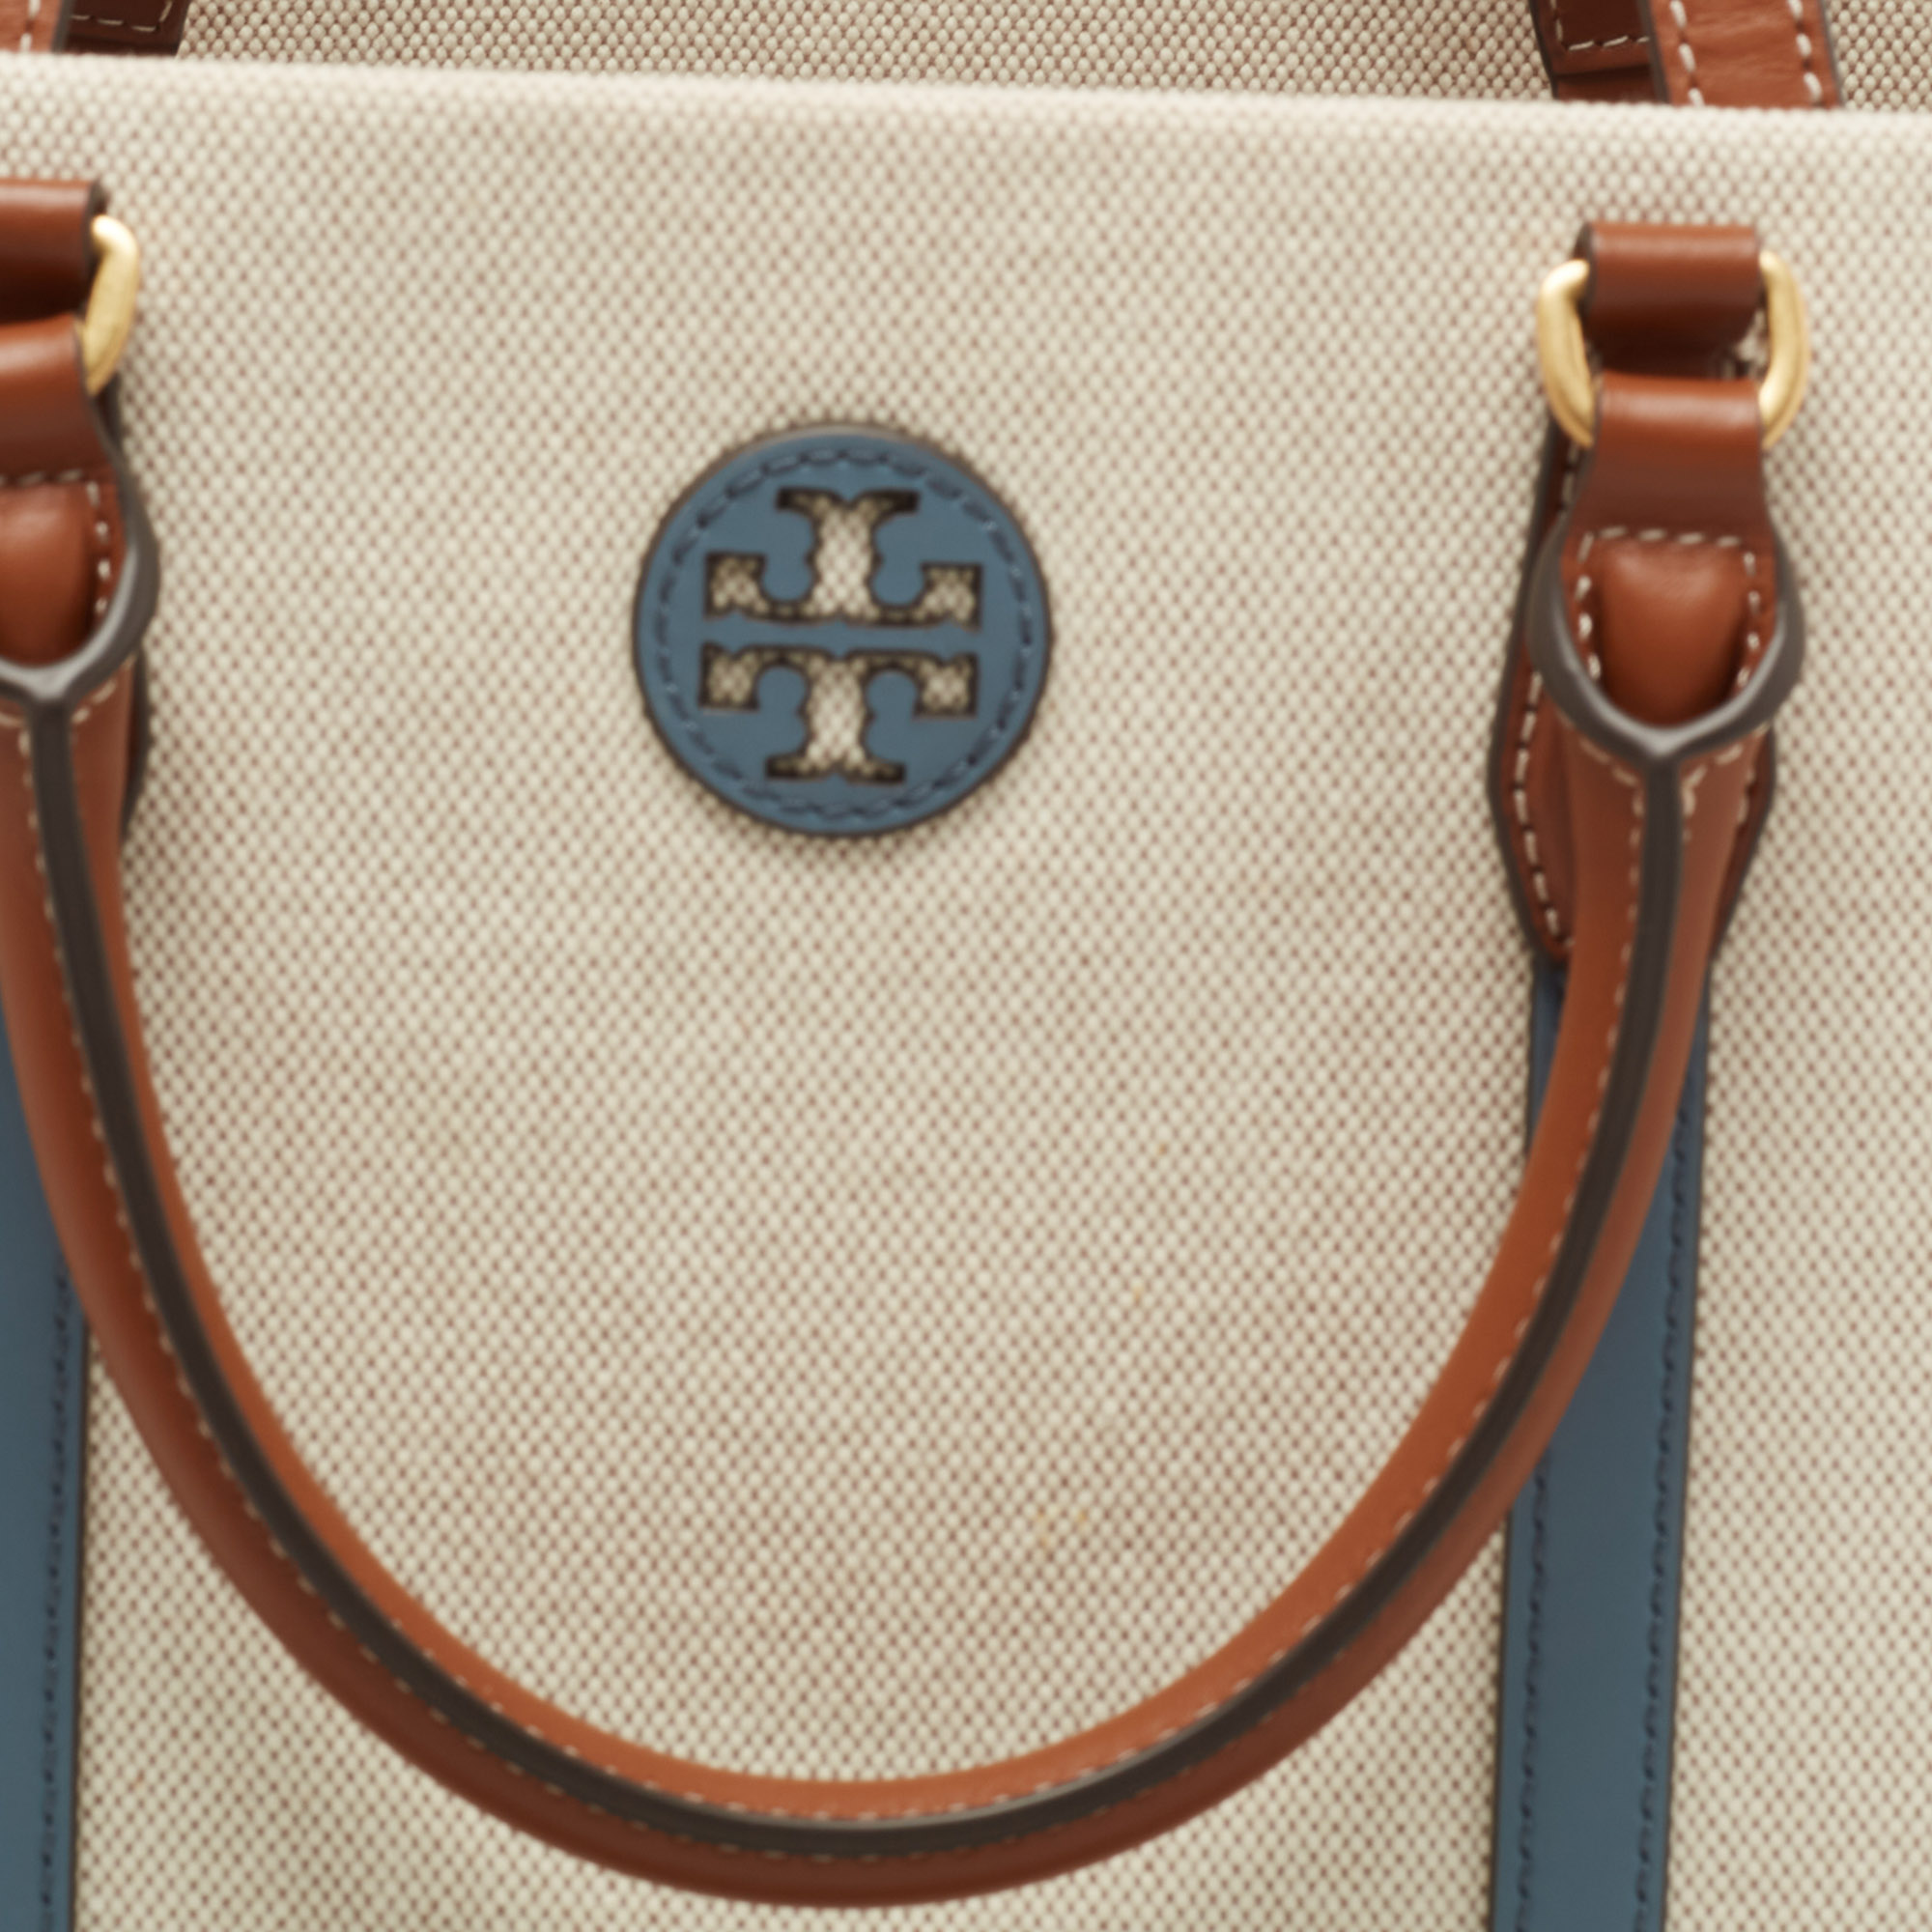 Tory Burch Beige Canvas and Leather Blake Shopper Tote Tory Burch | The  Luxury Closet